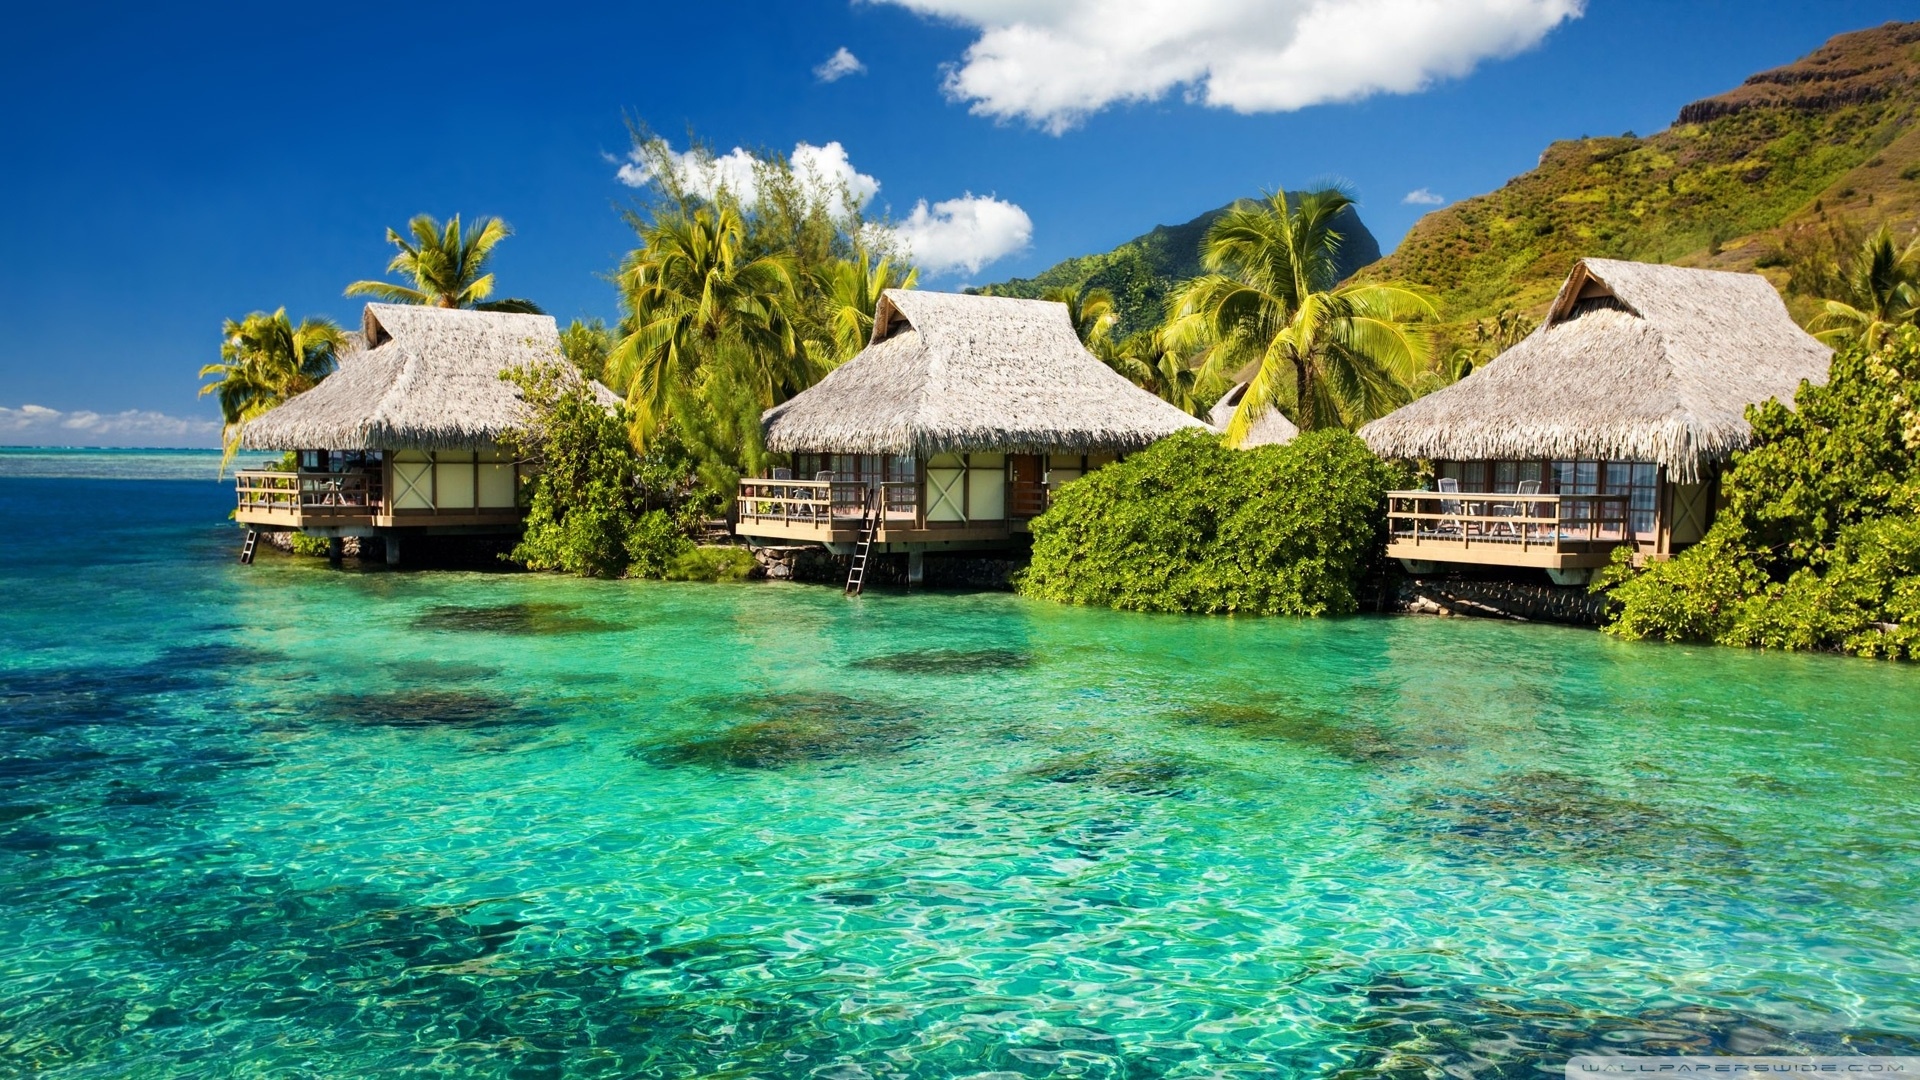 Water Bungalows On A Tropical Island Wallpaper